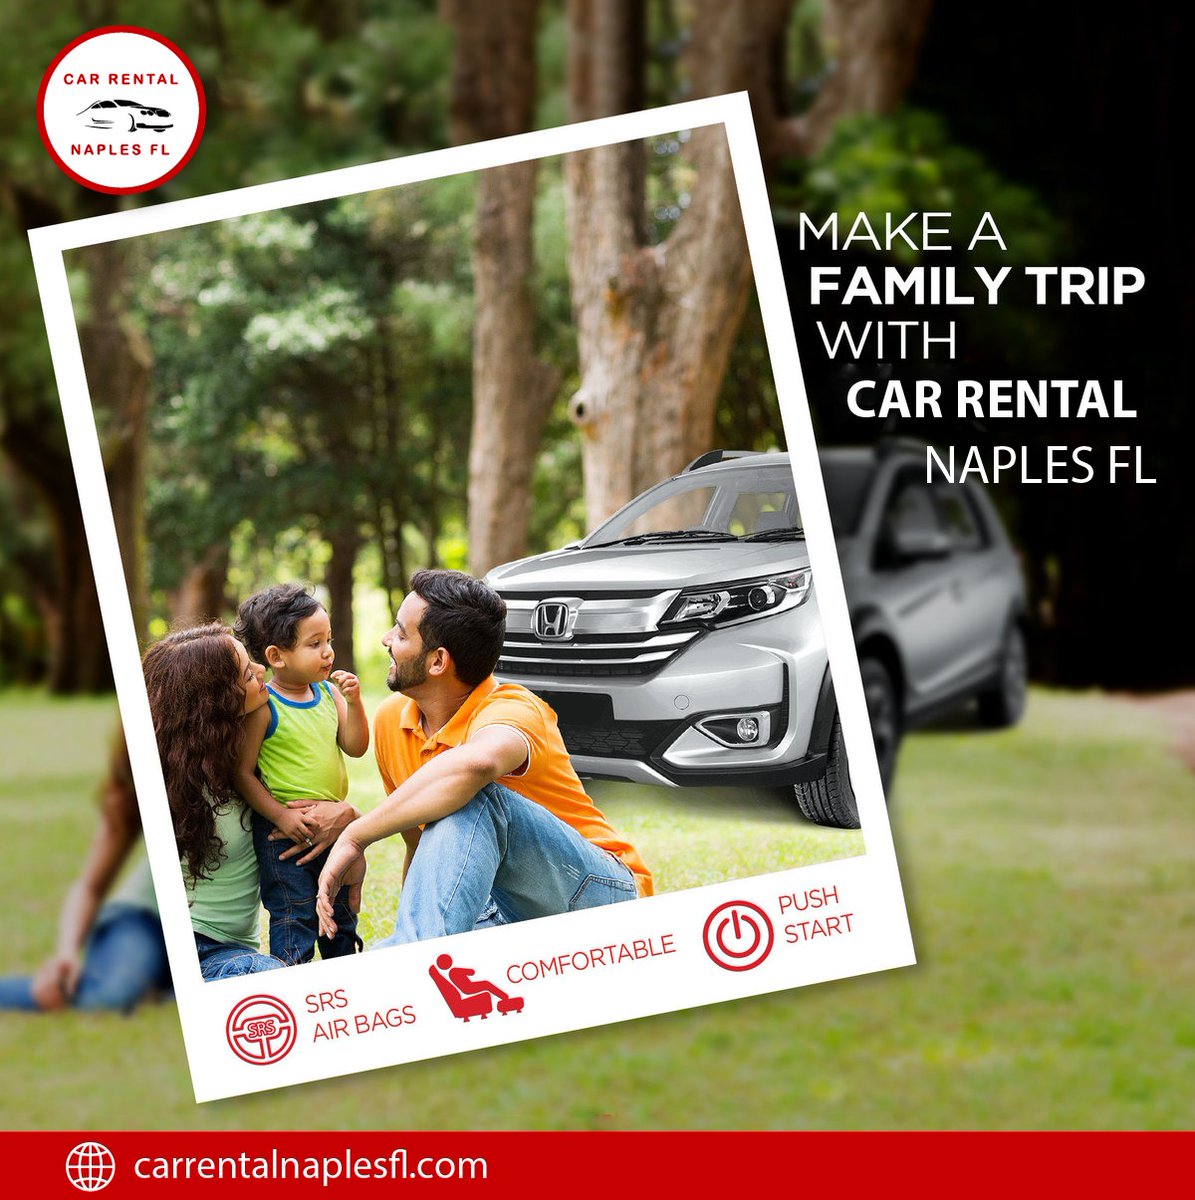 🚗✨ Embark on a Family Adventure with #CarRentalNaplesFL! 🌴🌞

Ready to turn your family trip dreams into reality? 🌟 Cruise through the stunning landscapes of Naples, FL in style with our top-notch car rental services! 🚗💨 

#FamilyAdventure #ExploreNaples #RoadTripReady